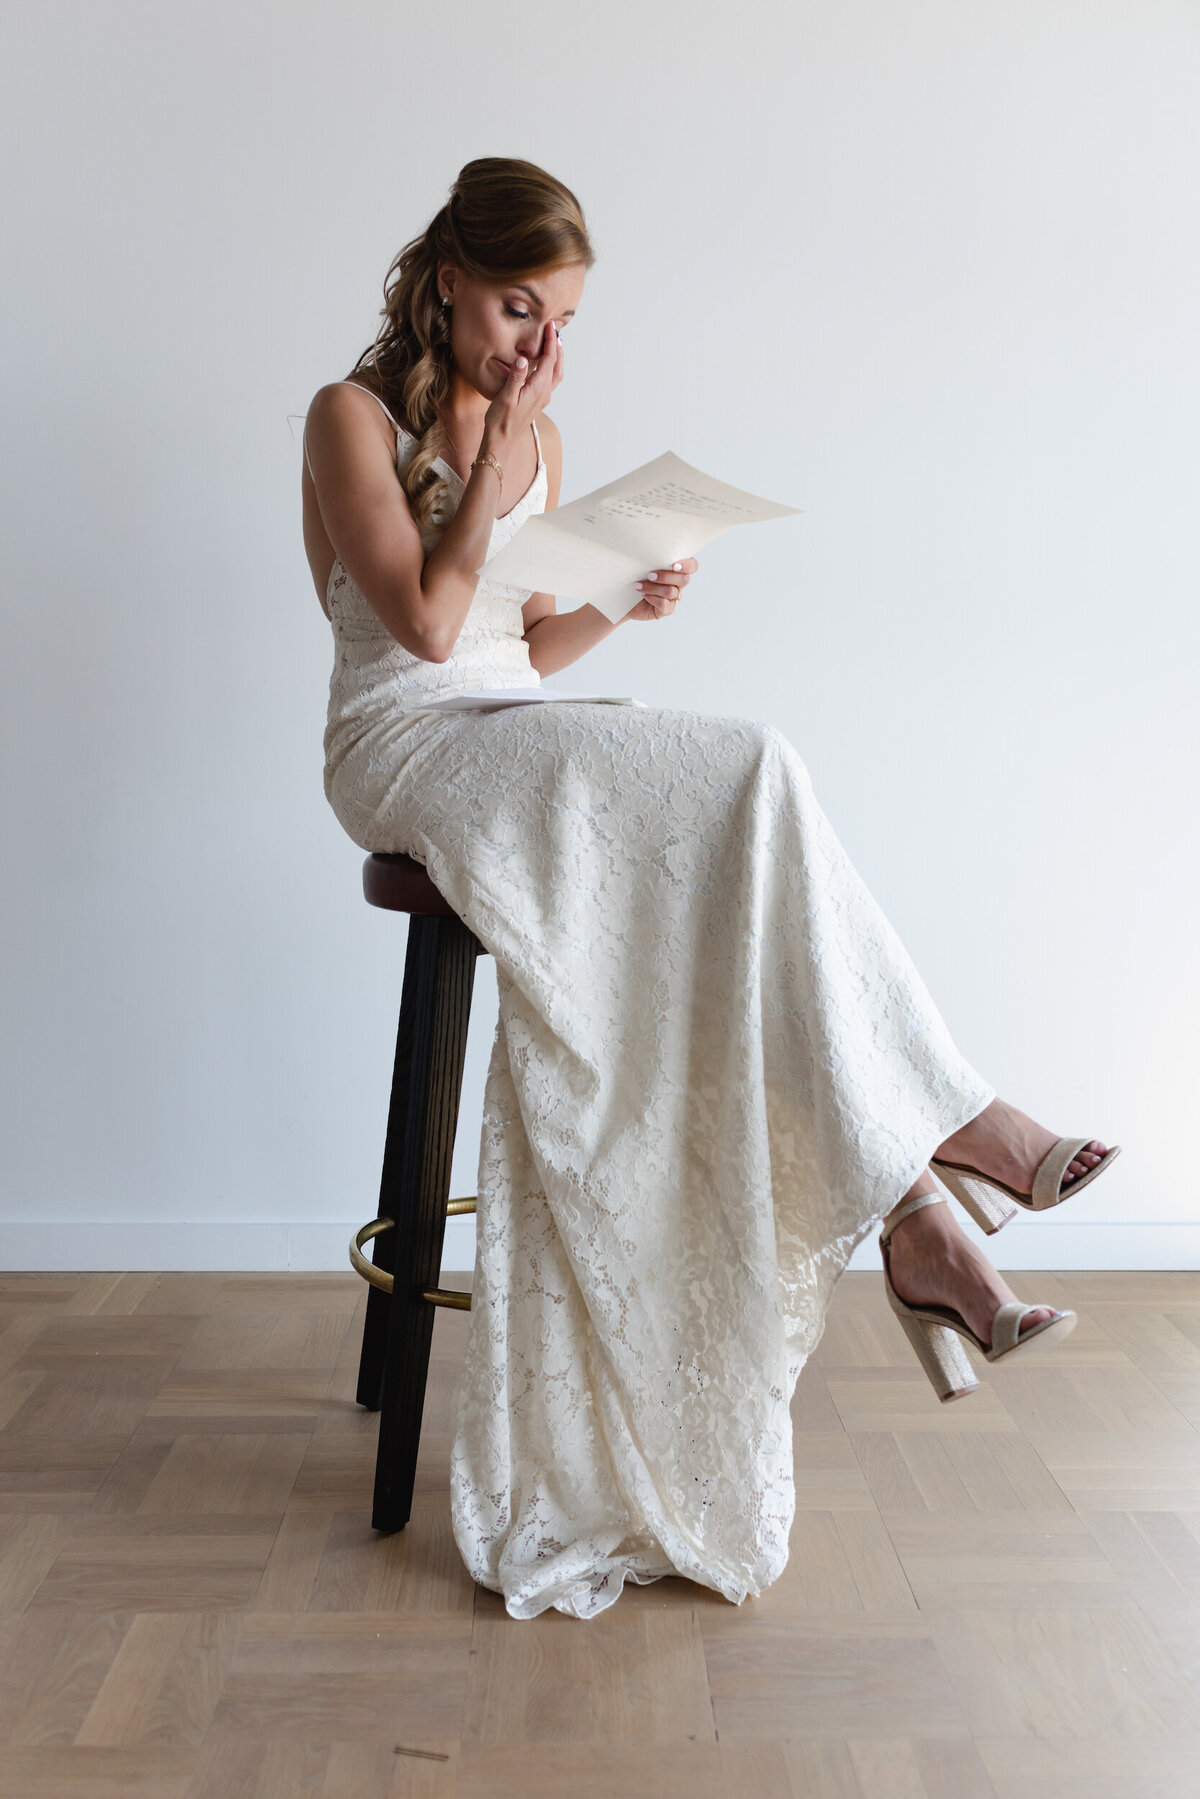 A bride show lots of emotion while ready a letter from her groom